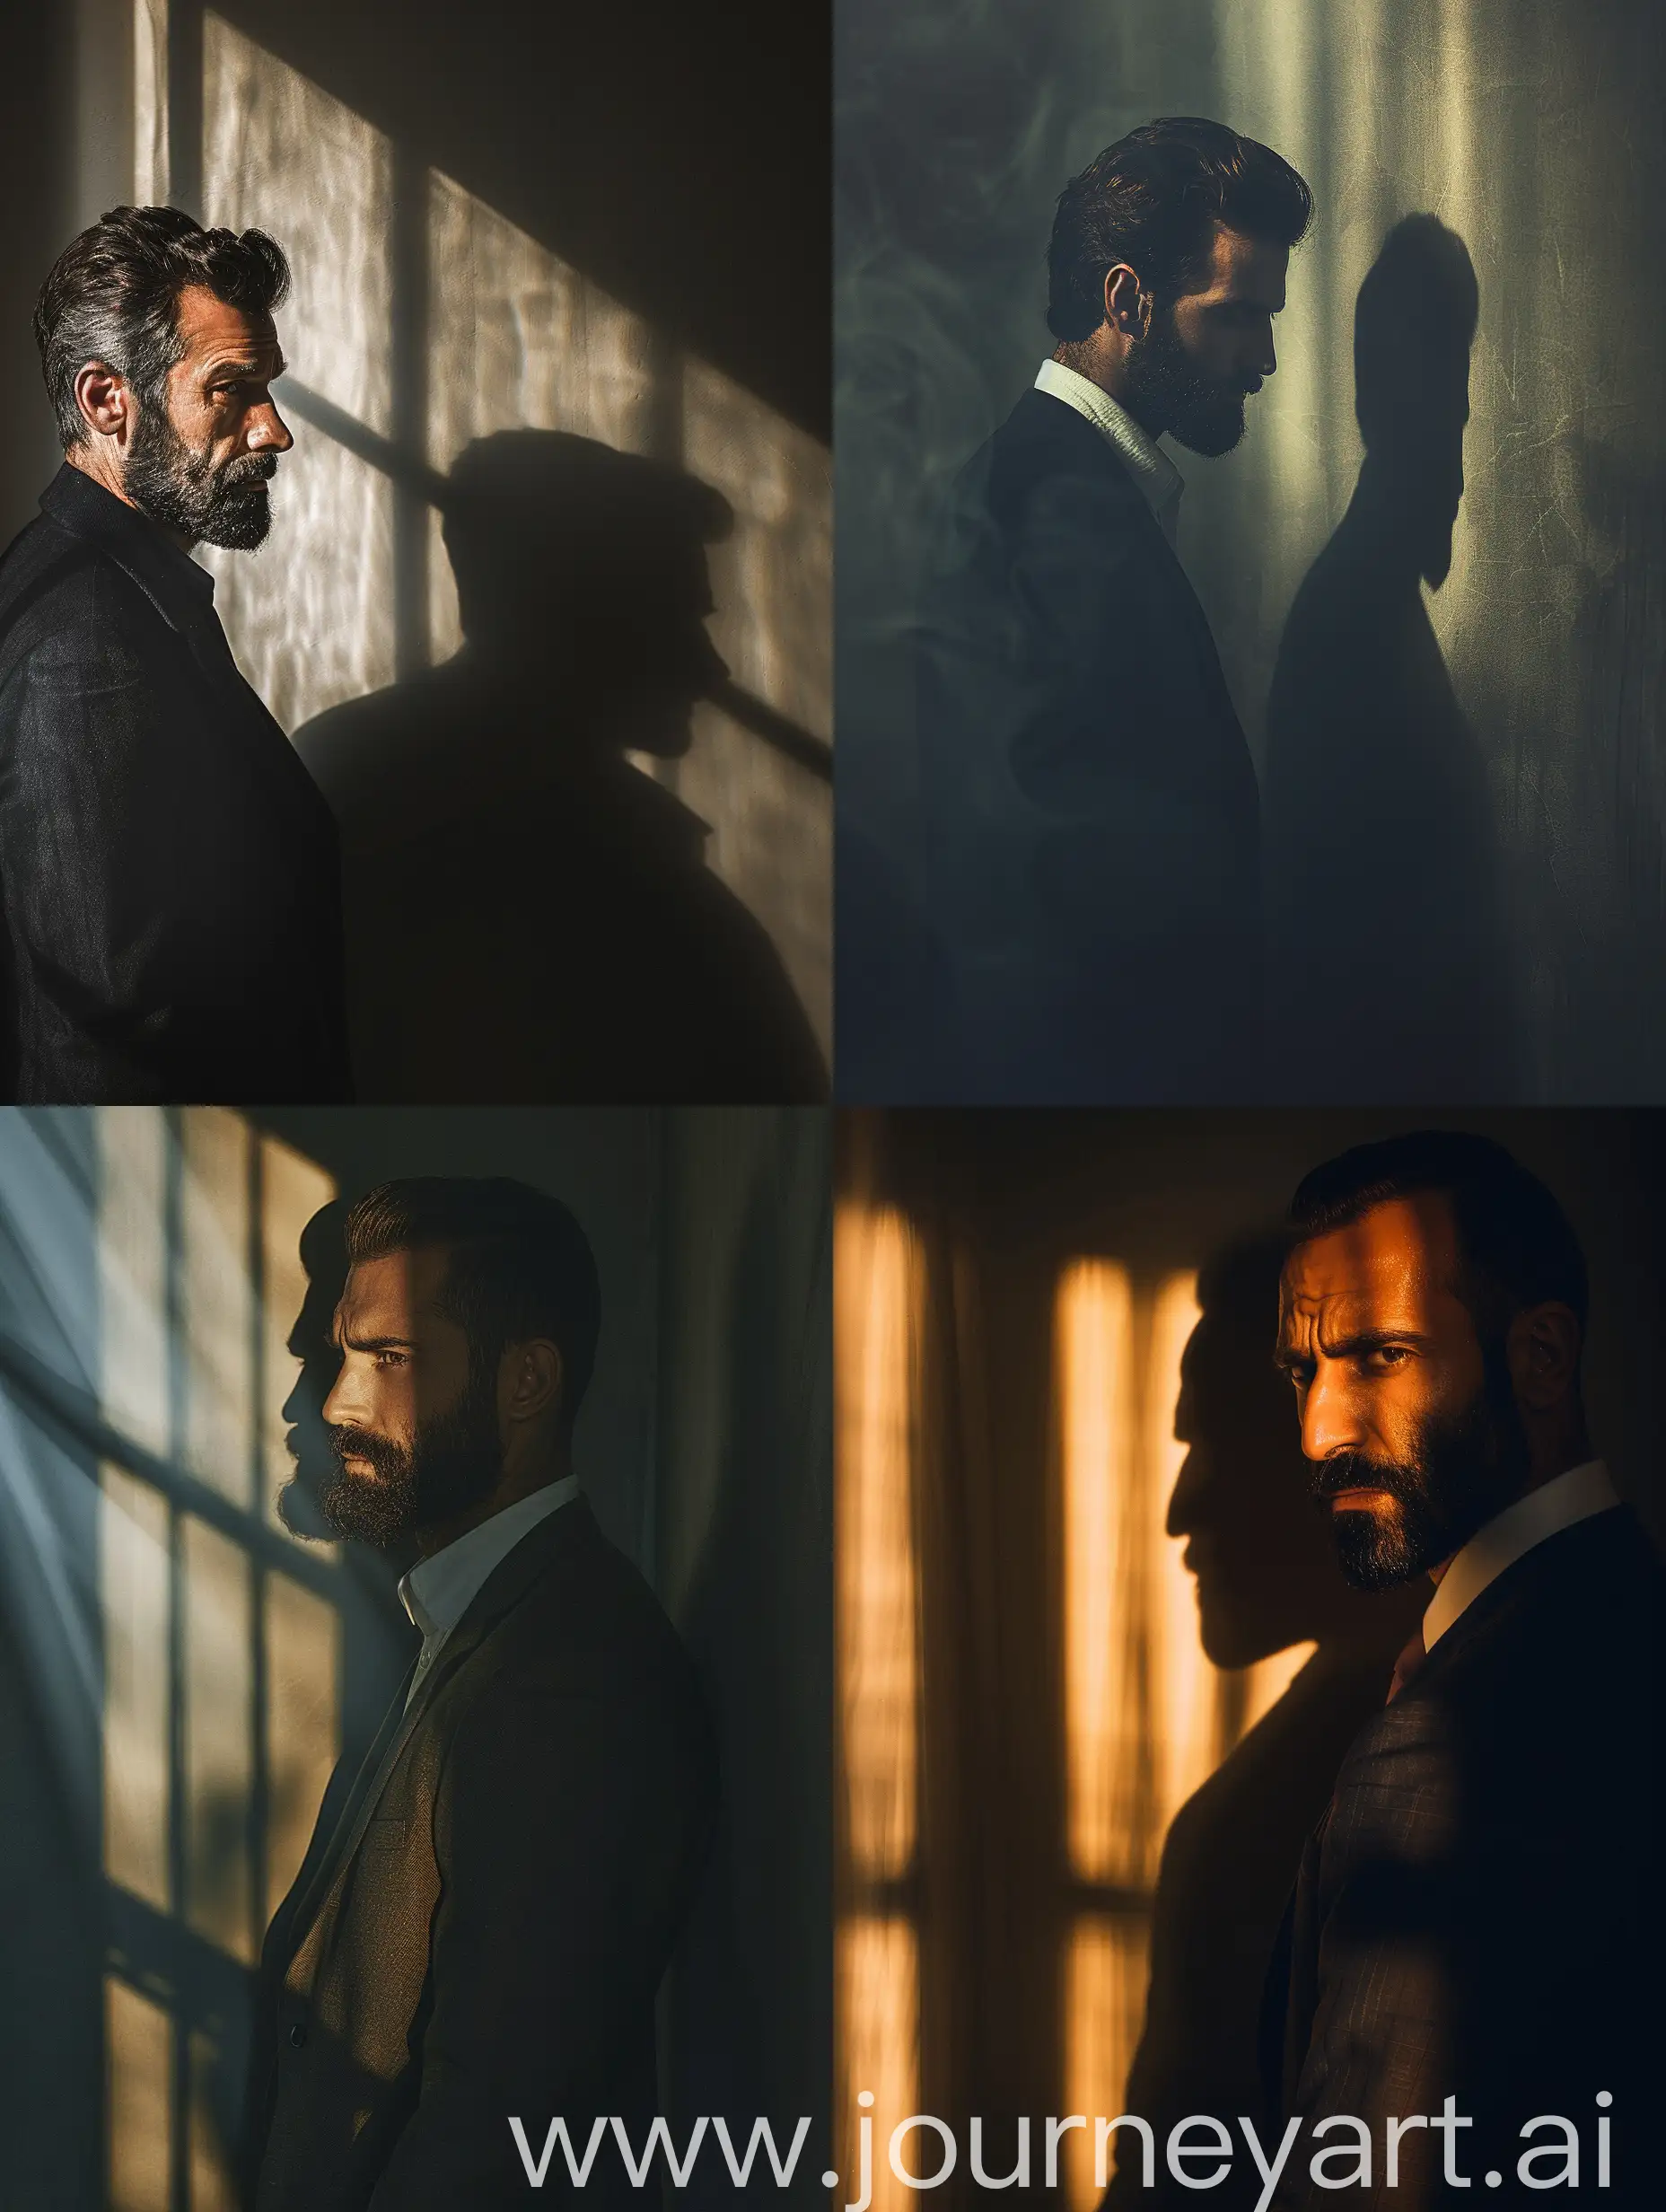 A Sad Man with Beard and Hair Trimmed Standing Next to the Wall in Dark Place, The Light Shines on the Man And the Shadow of the Man on the Wall, Formal Outfit, Cinematic Photography Style, Natural Shadow, Natural Color Details, Extremely Details, High Quality --v 6.0 --ar 3:4